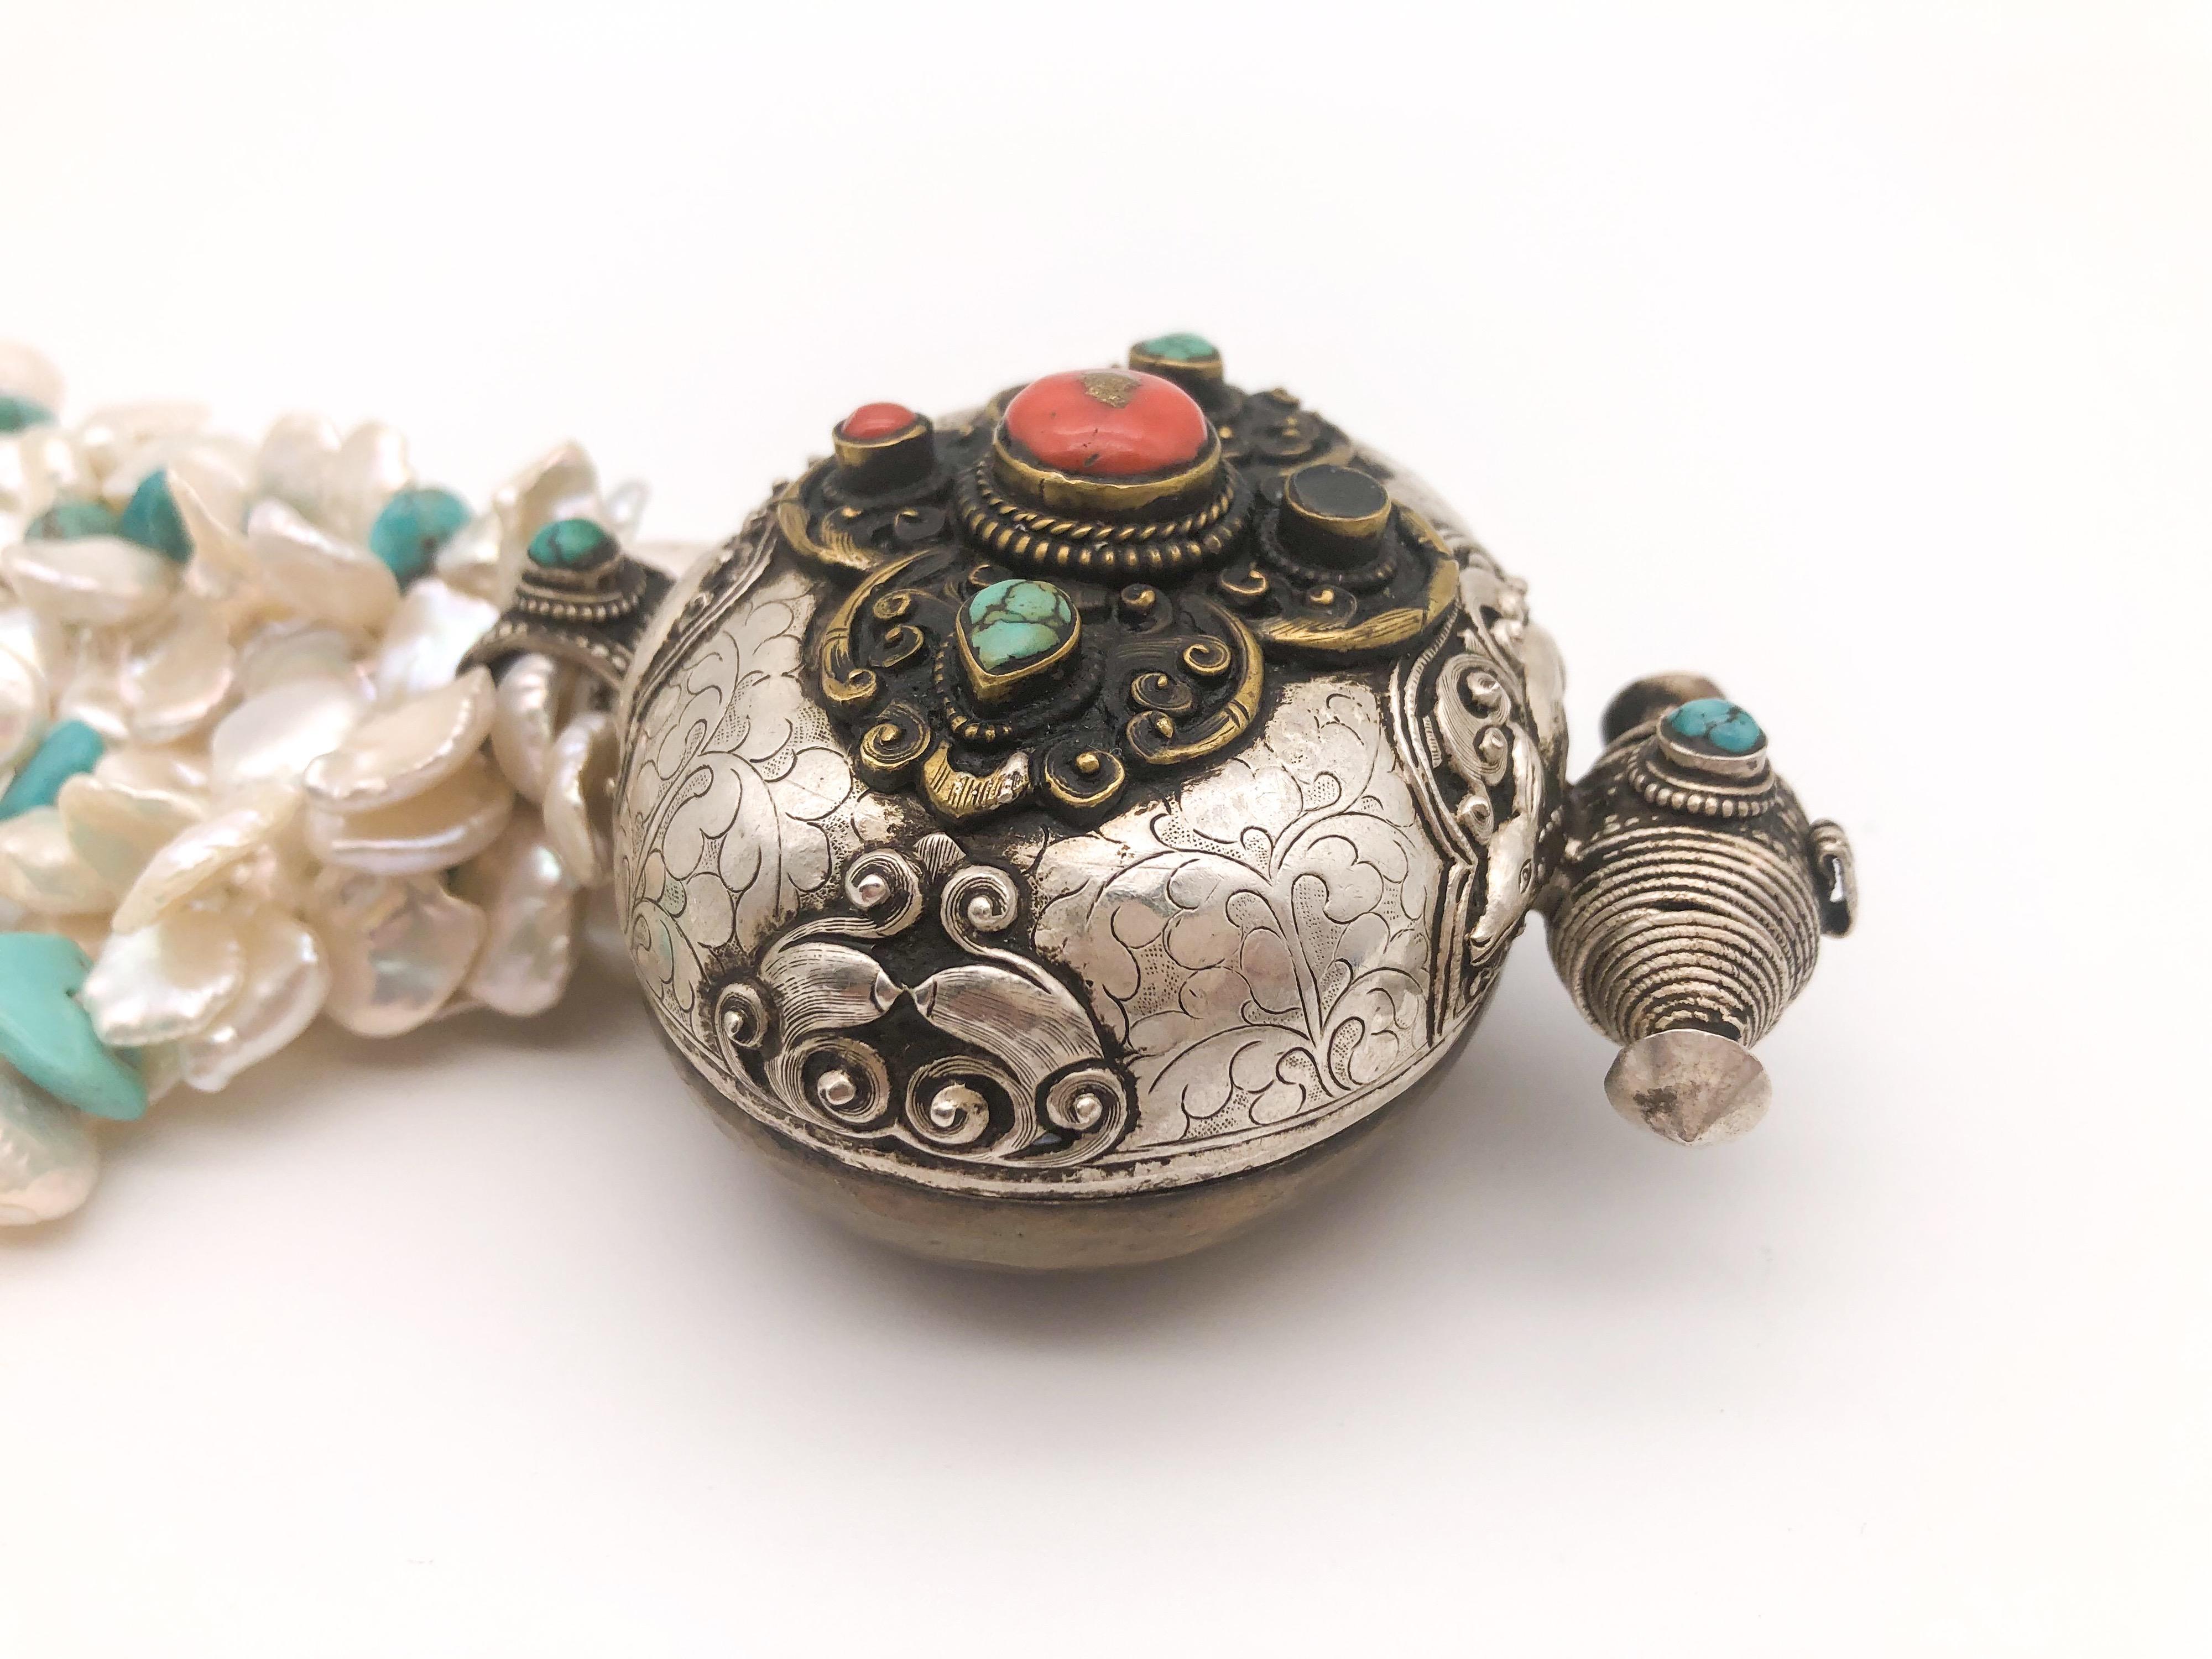 Contemporary A.Jeschel Traditional Tibetan Ghau Box pendant with Turquoise and Keshi Pearls For Sale